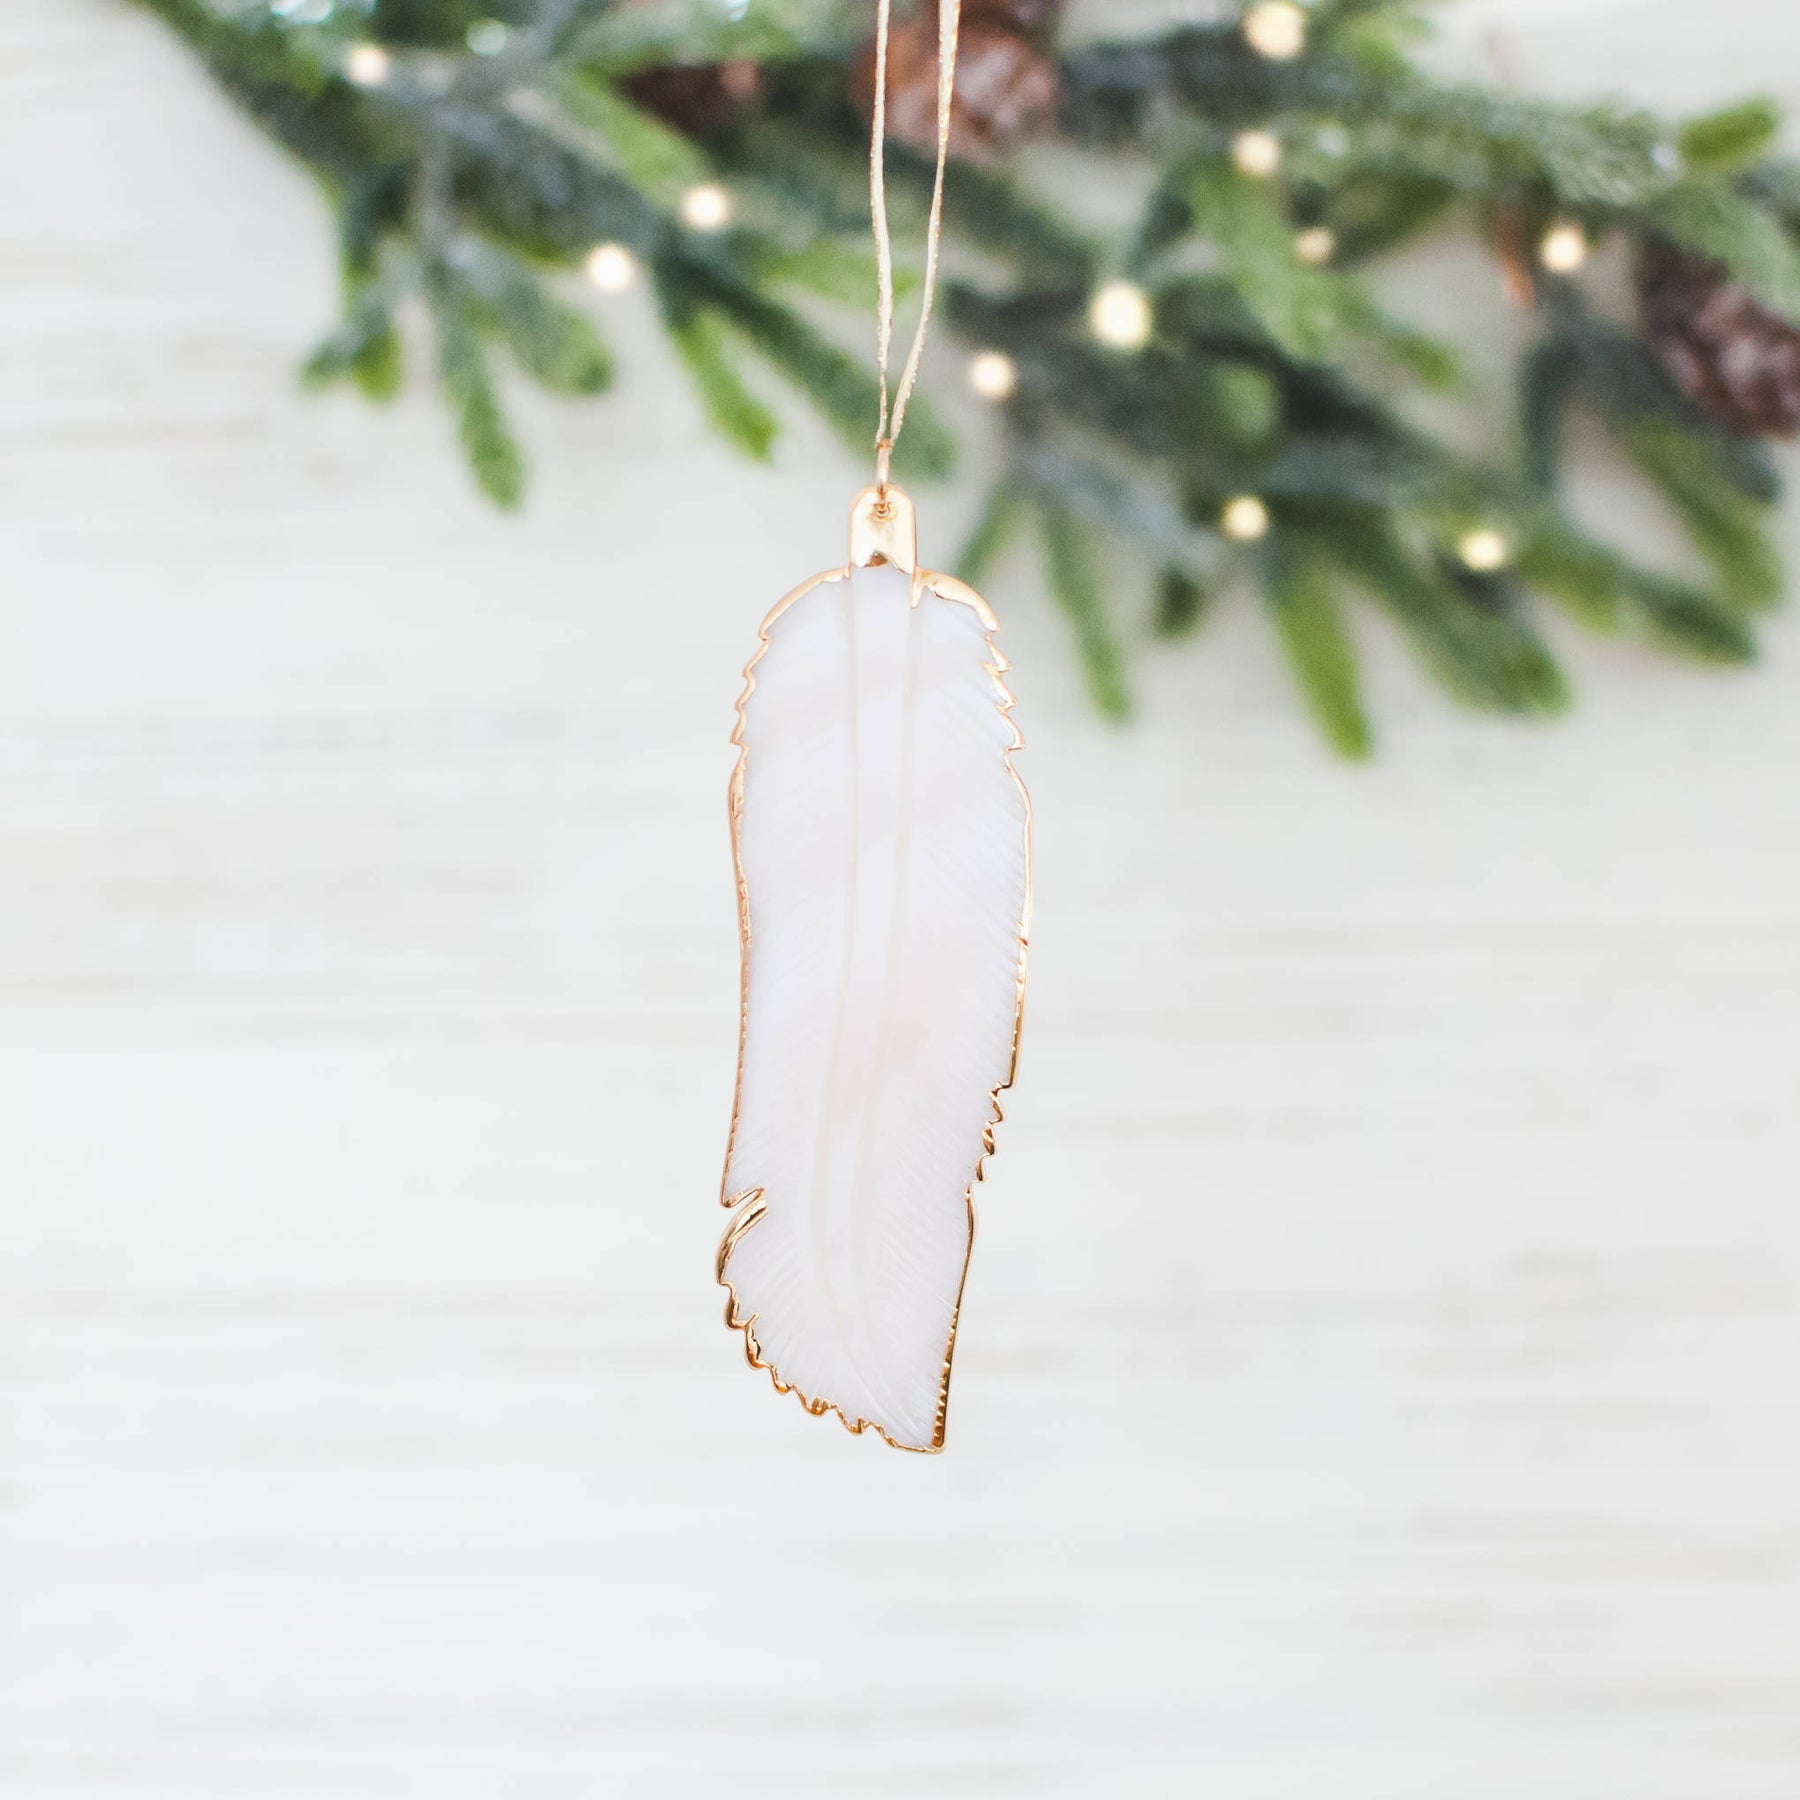 In Memory Feather Memorial Ornament - Grief Gift